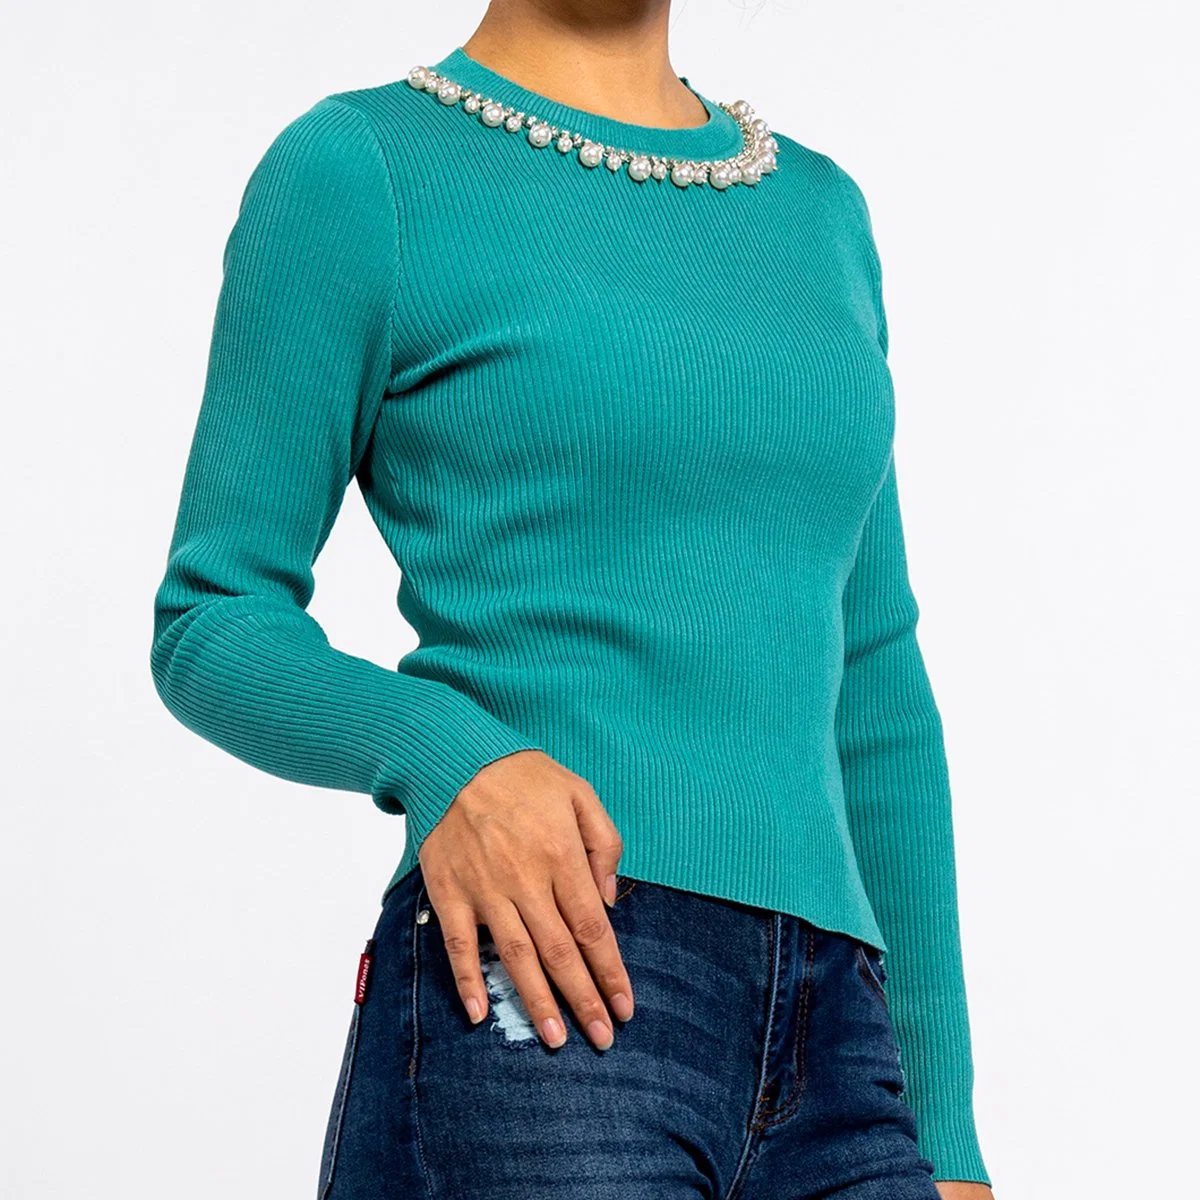 Women's Round Neck Pearl Decorative Collar Bottoming Knit Tops Green Sweater Pullover